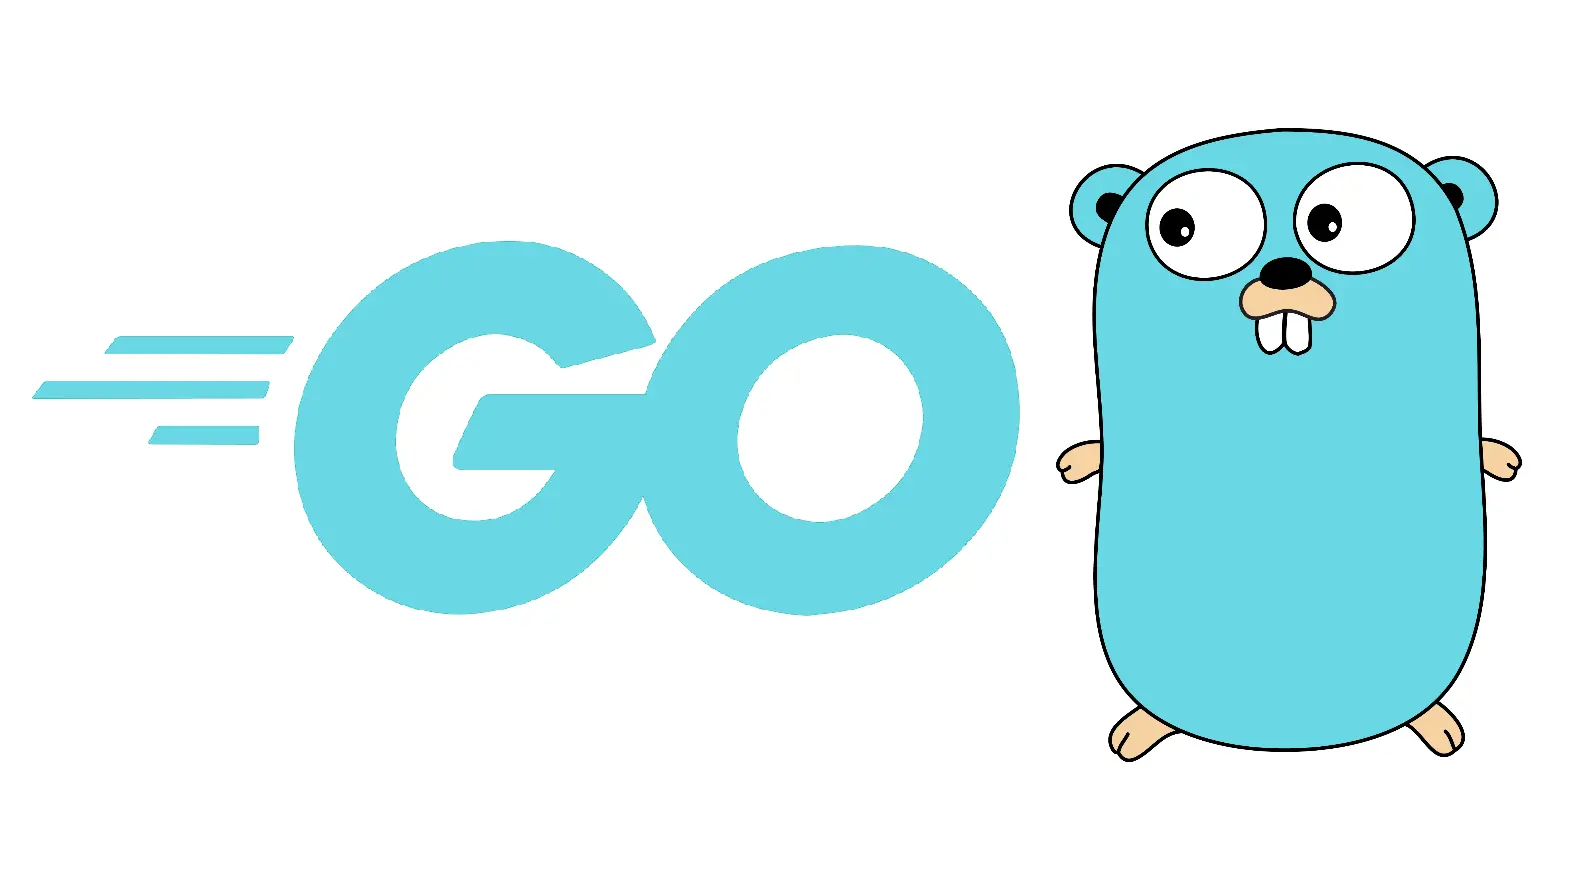 Top 1 Upcoming Golang Conferences that you shouldn't miss